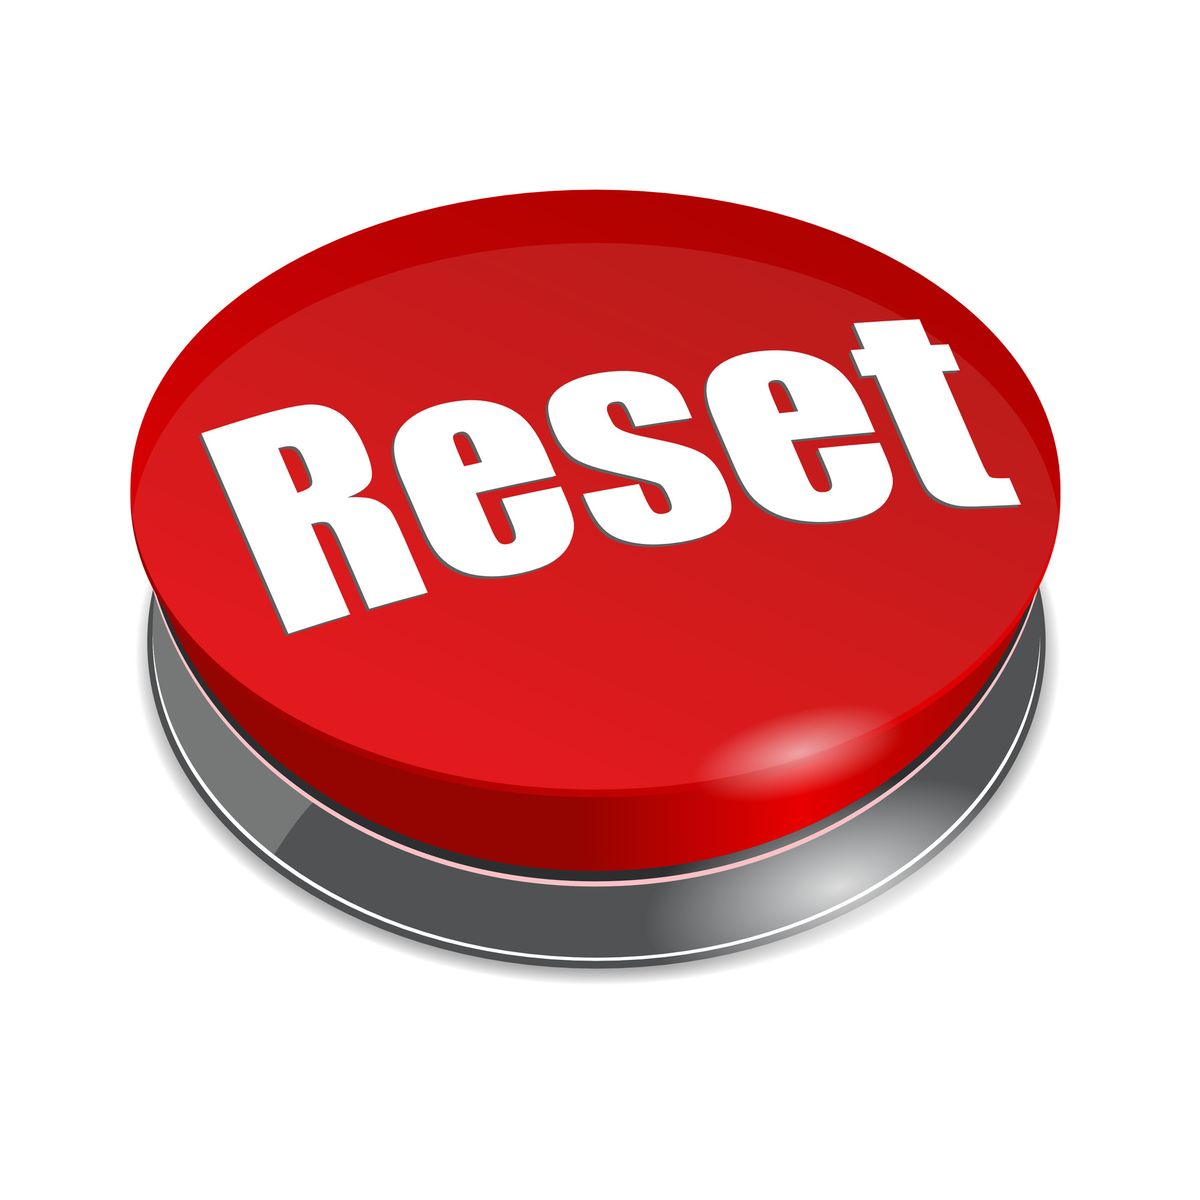 Hitting Your Reset Button